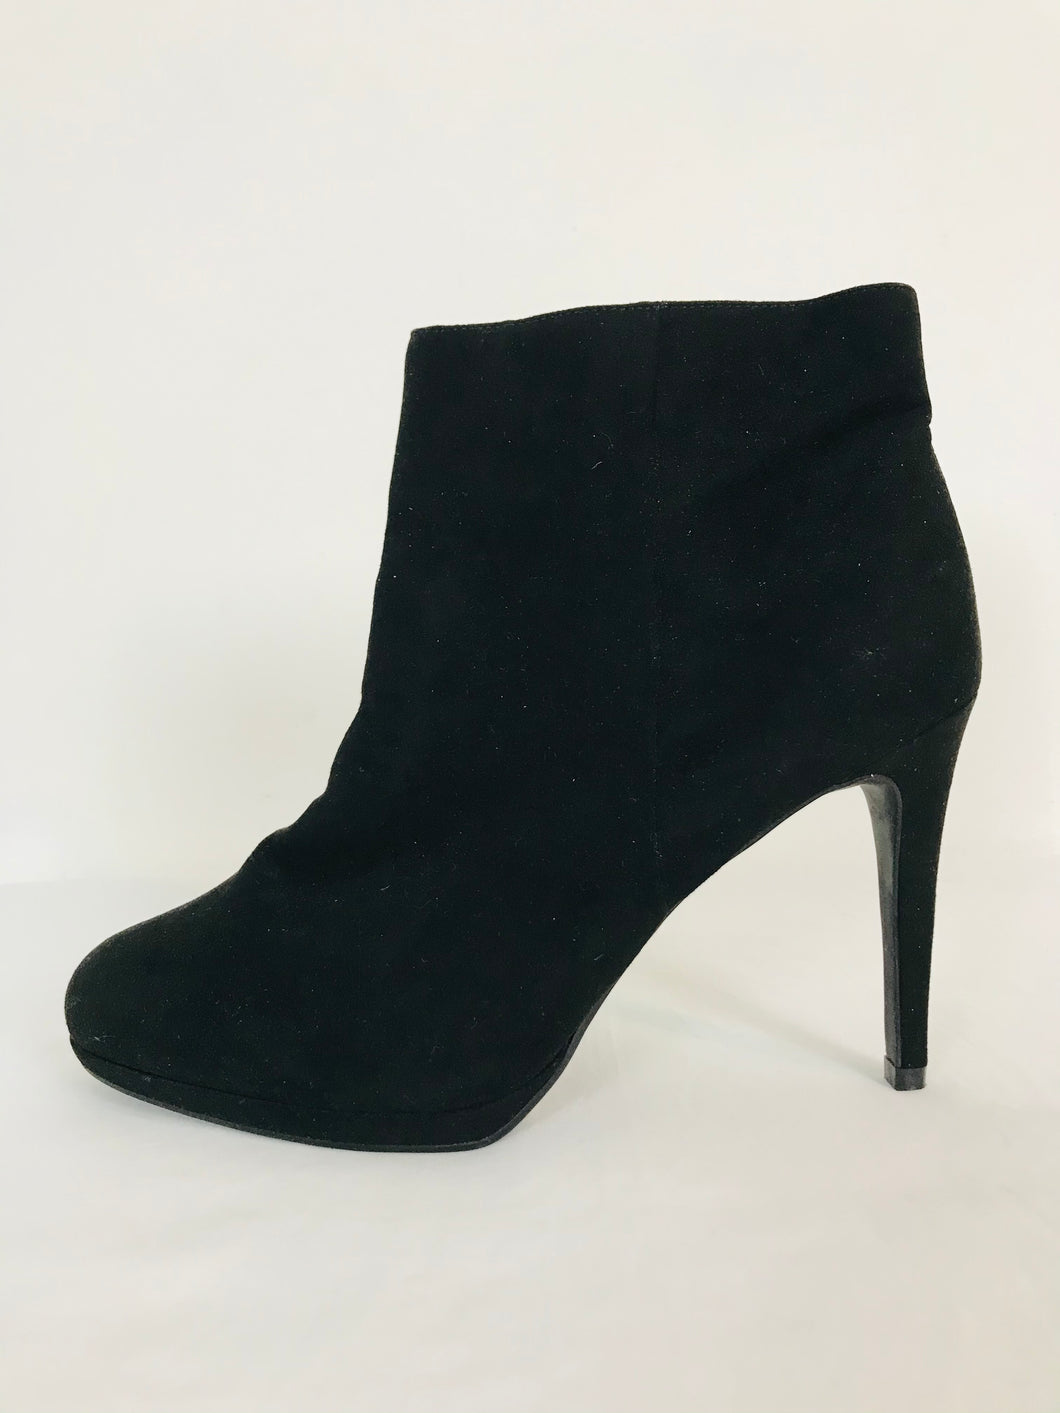 M&S Women’s Heeled Ankle Boot | UK6.5 | Black